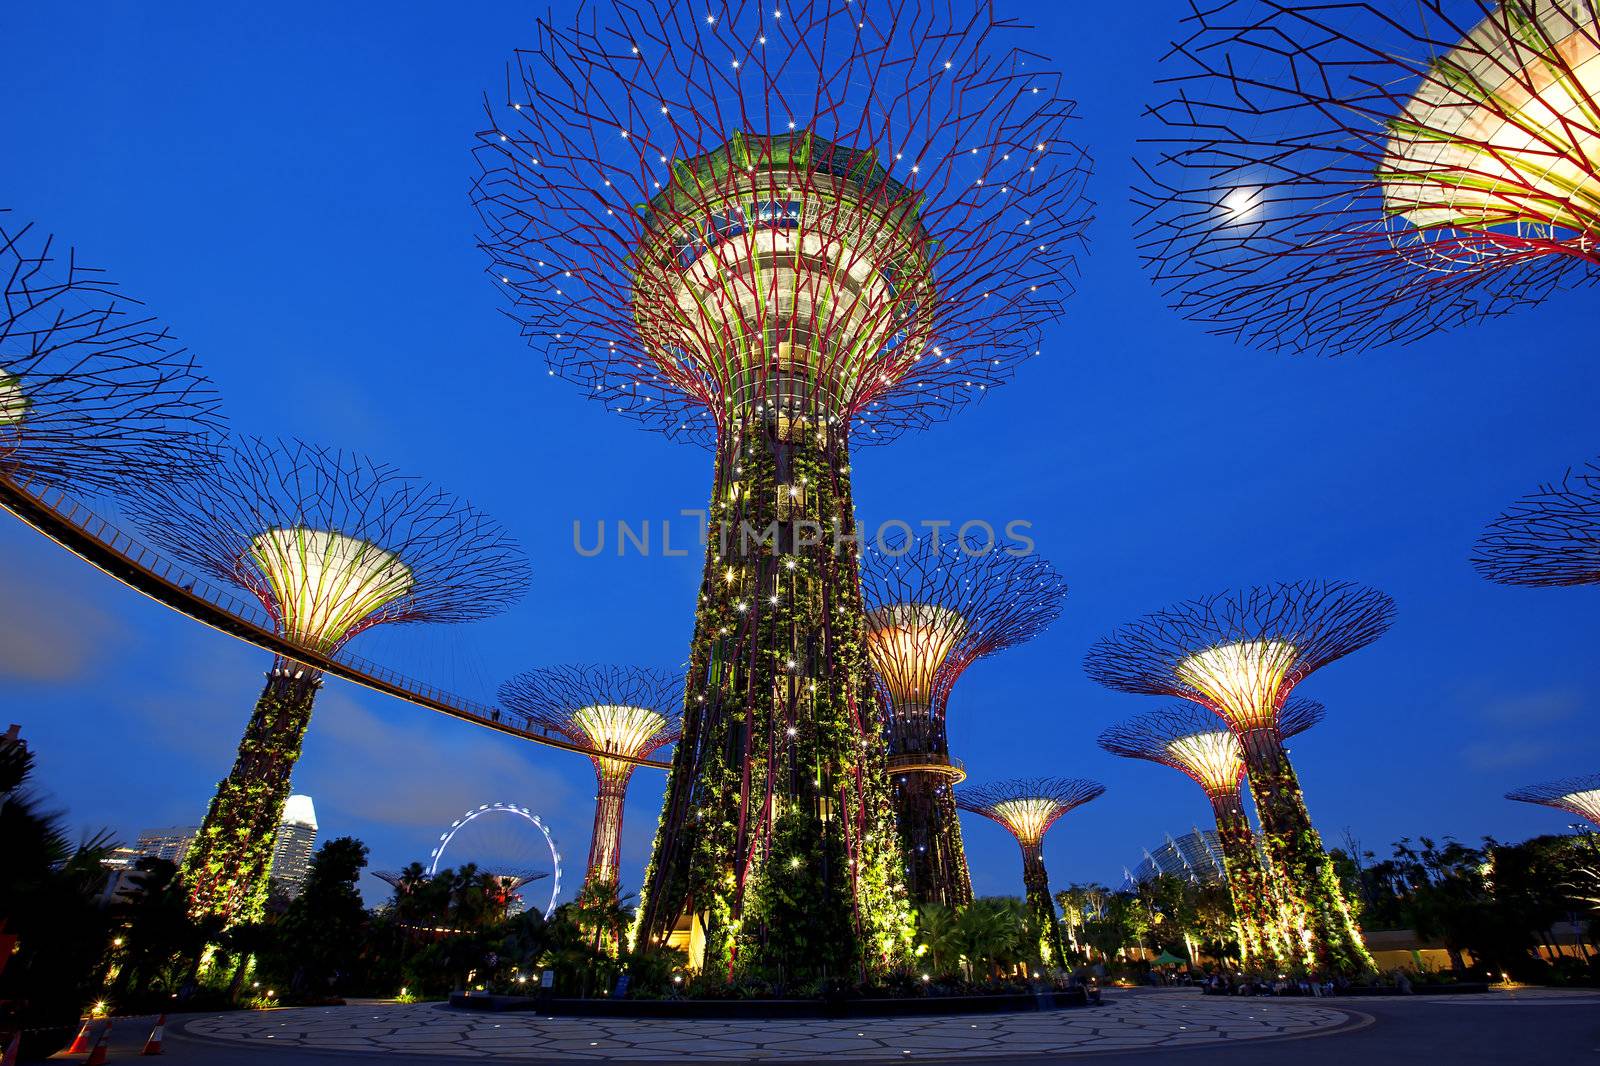 SINGAPORE - JANUARY 23: Night view of Supertree Grove at Gardens by the Bay on January 23, 2013 in Singapore. Spanning 250 acres of reclaimed land in central Singapore, adjacent to the Marina Reservoir.